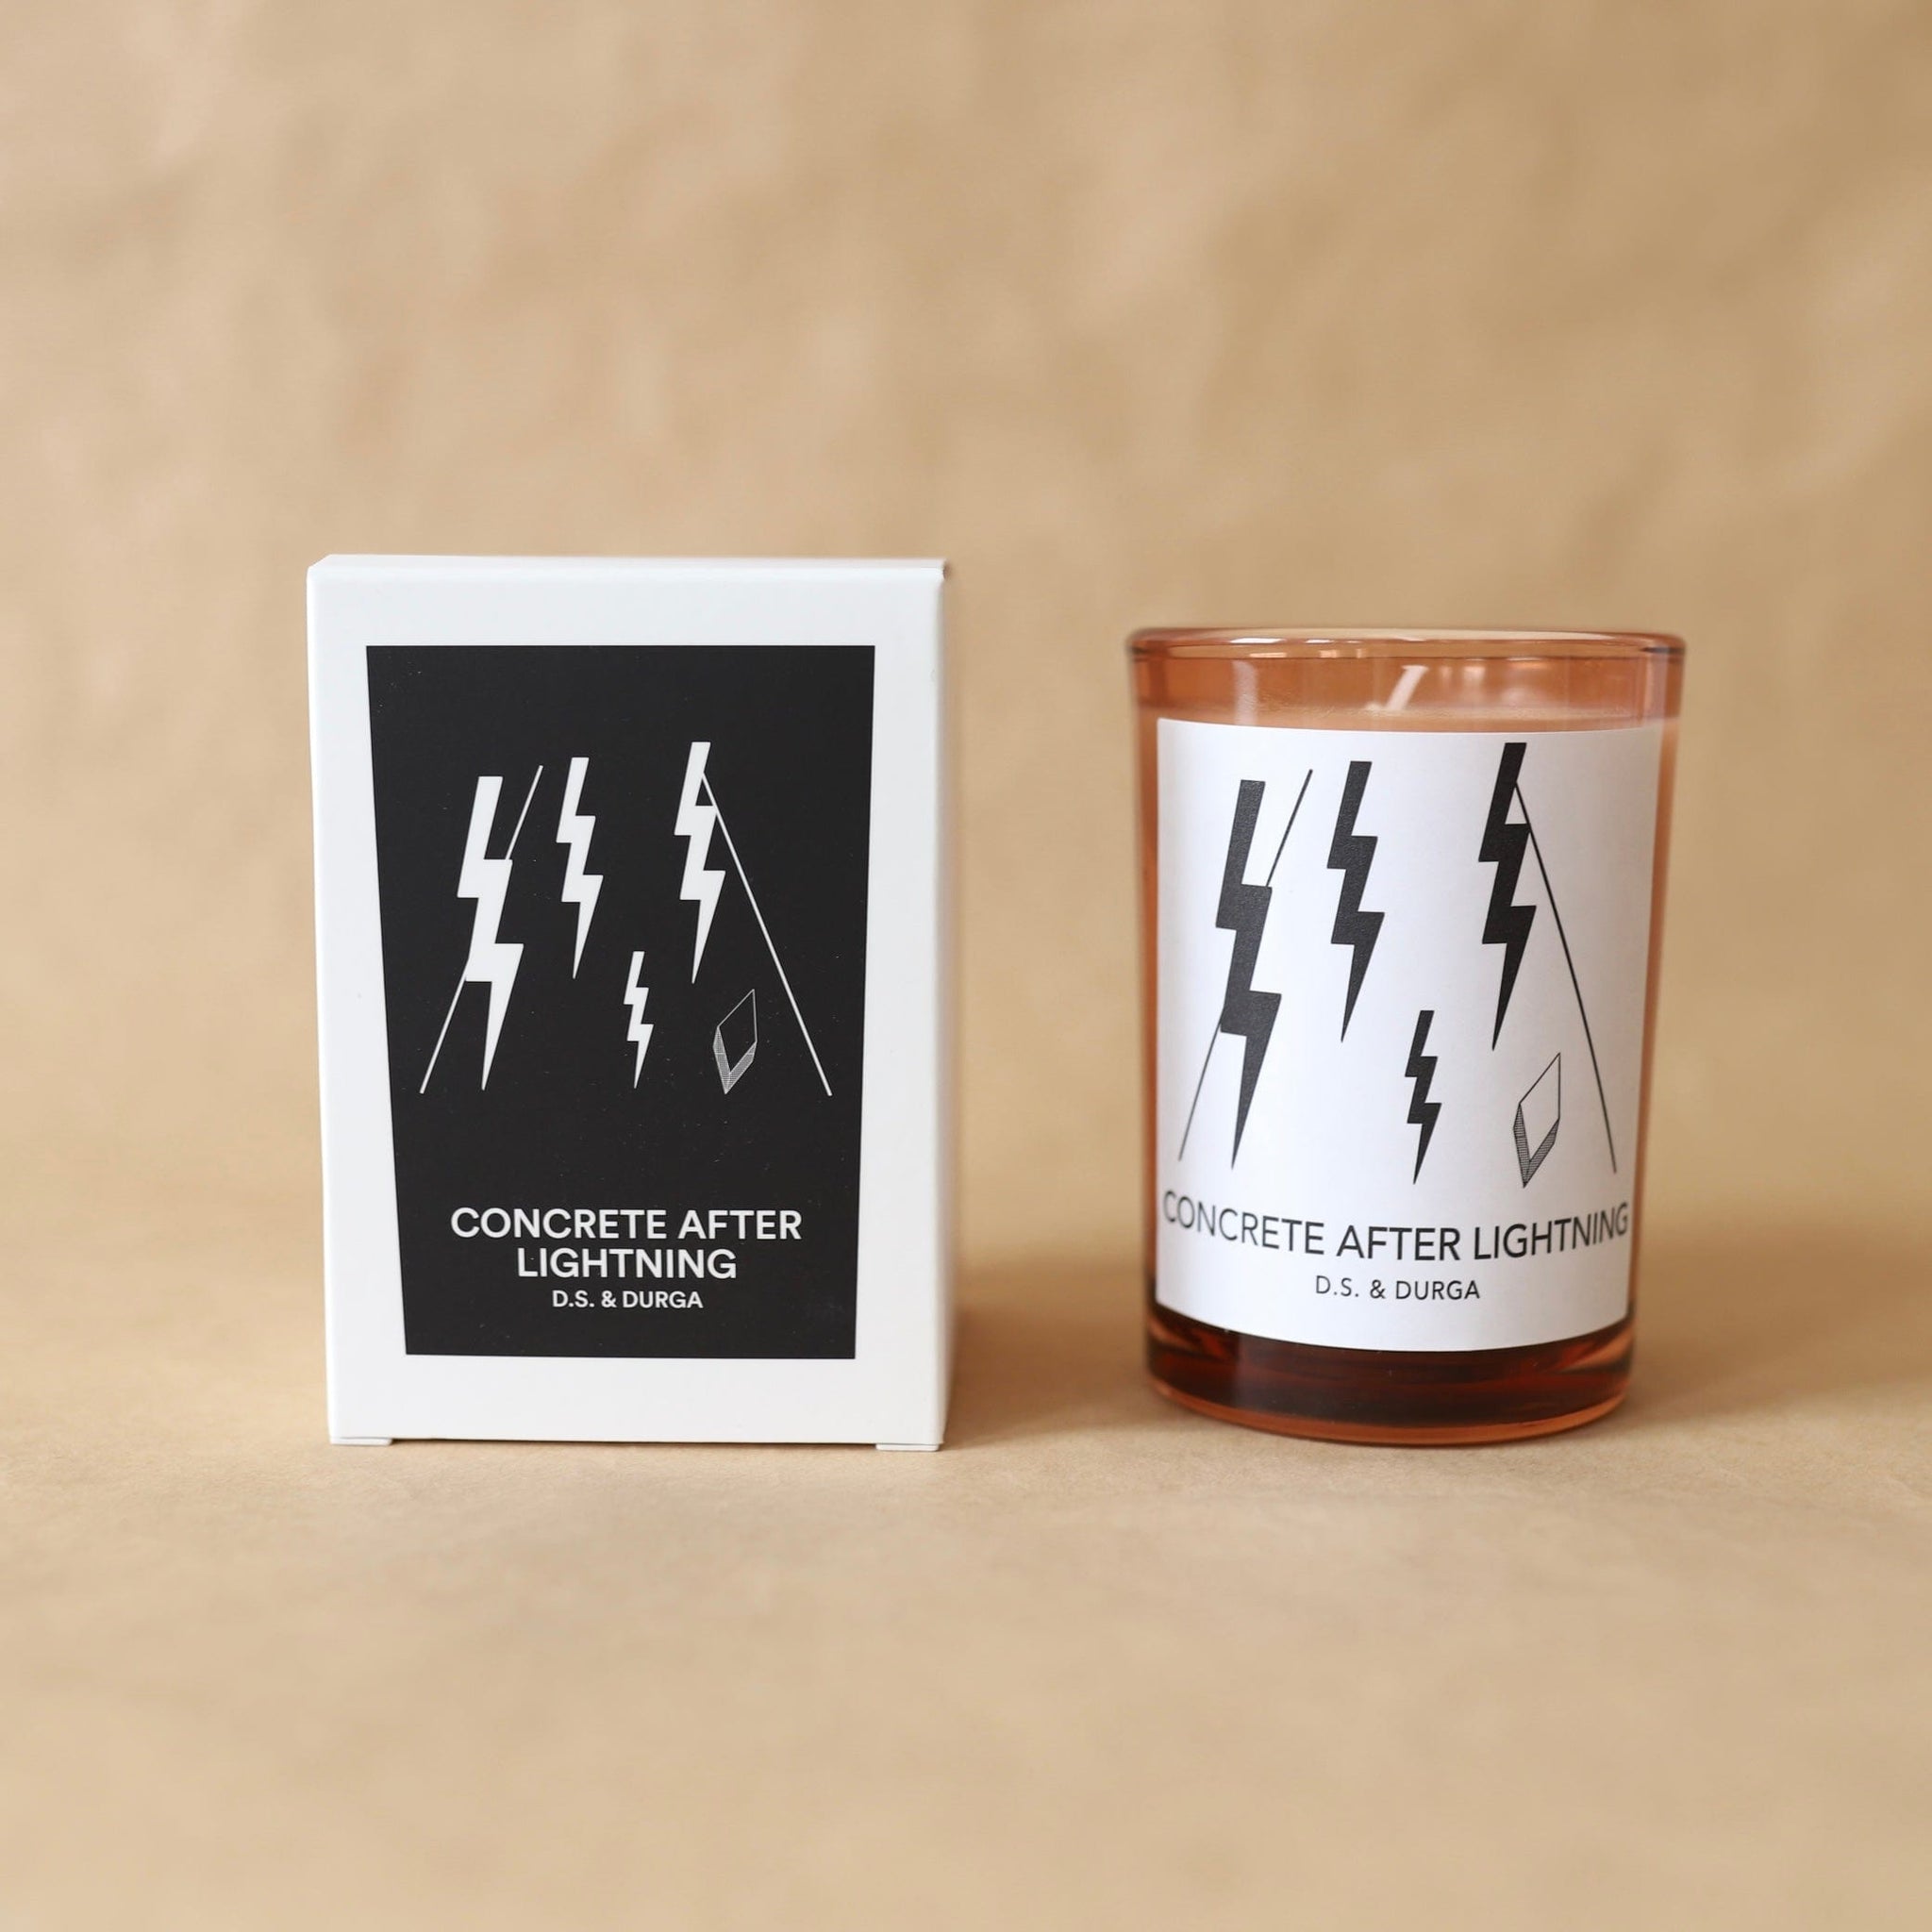 DS DURGA Apothecary Concrete After Lightning Scented Candles by D.S. & DURGA